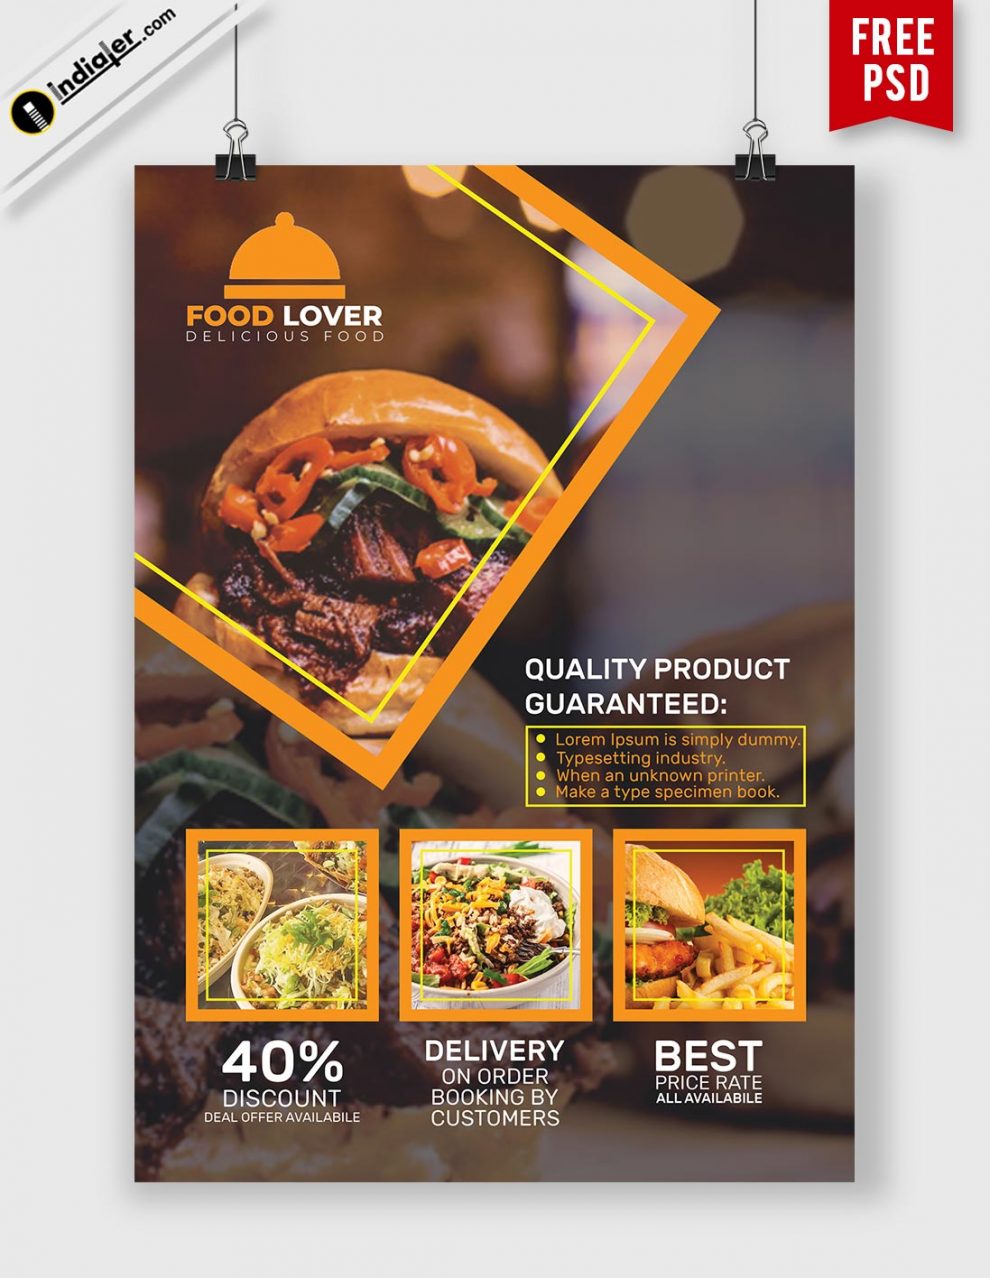 Download Free Restaurant Flyer PSD Templates for Indiater